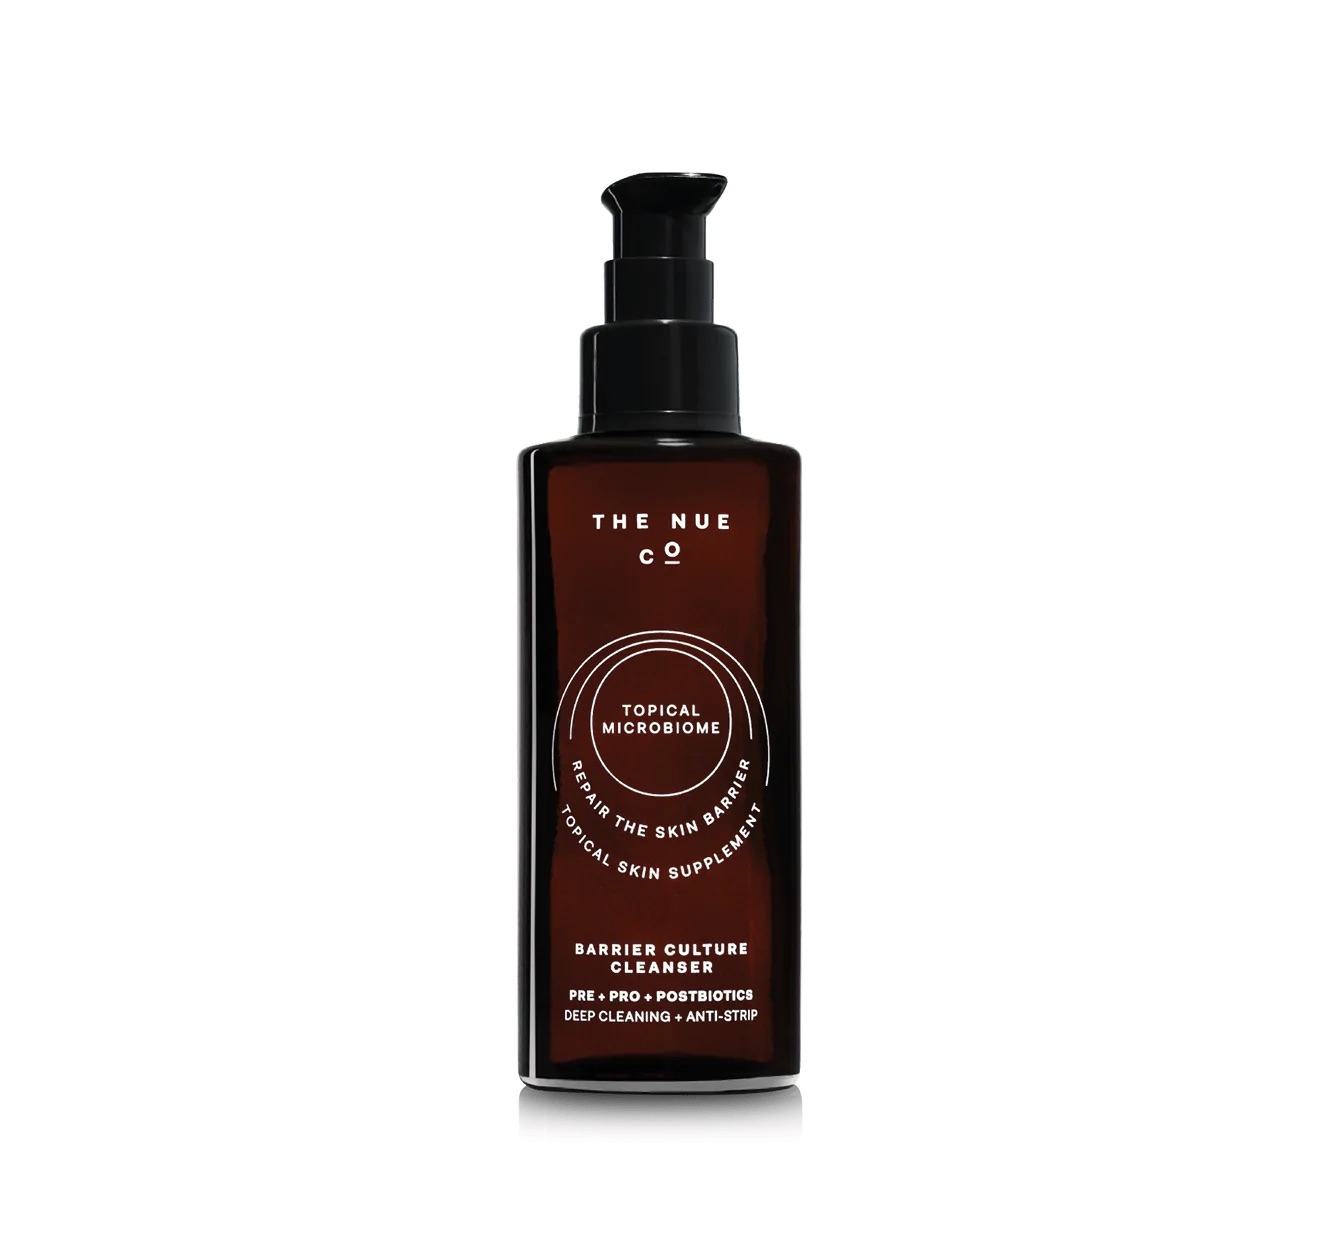 A brown bottle of The Nue Co cleanser.